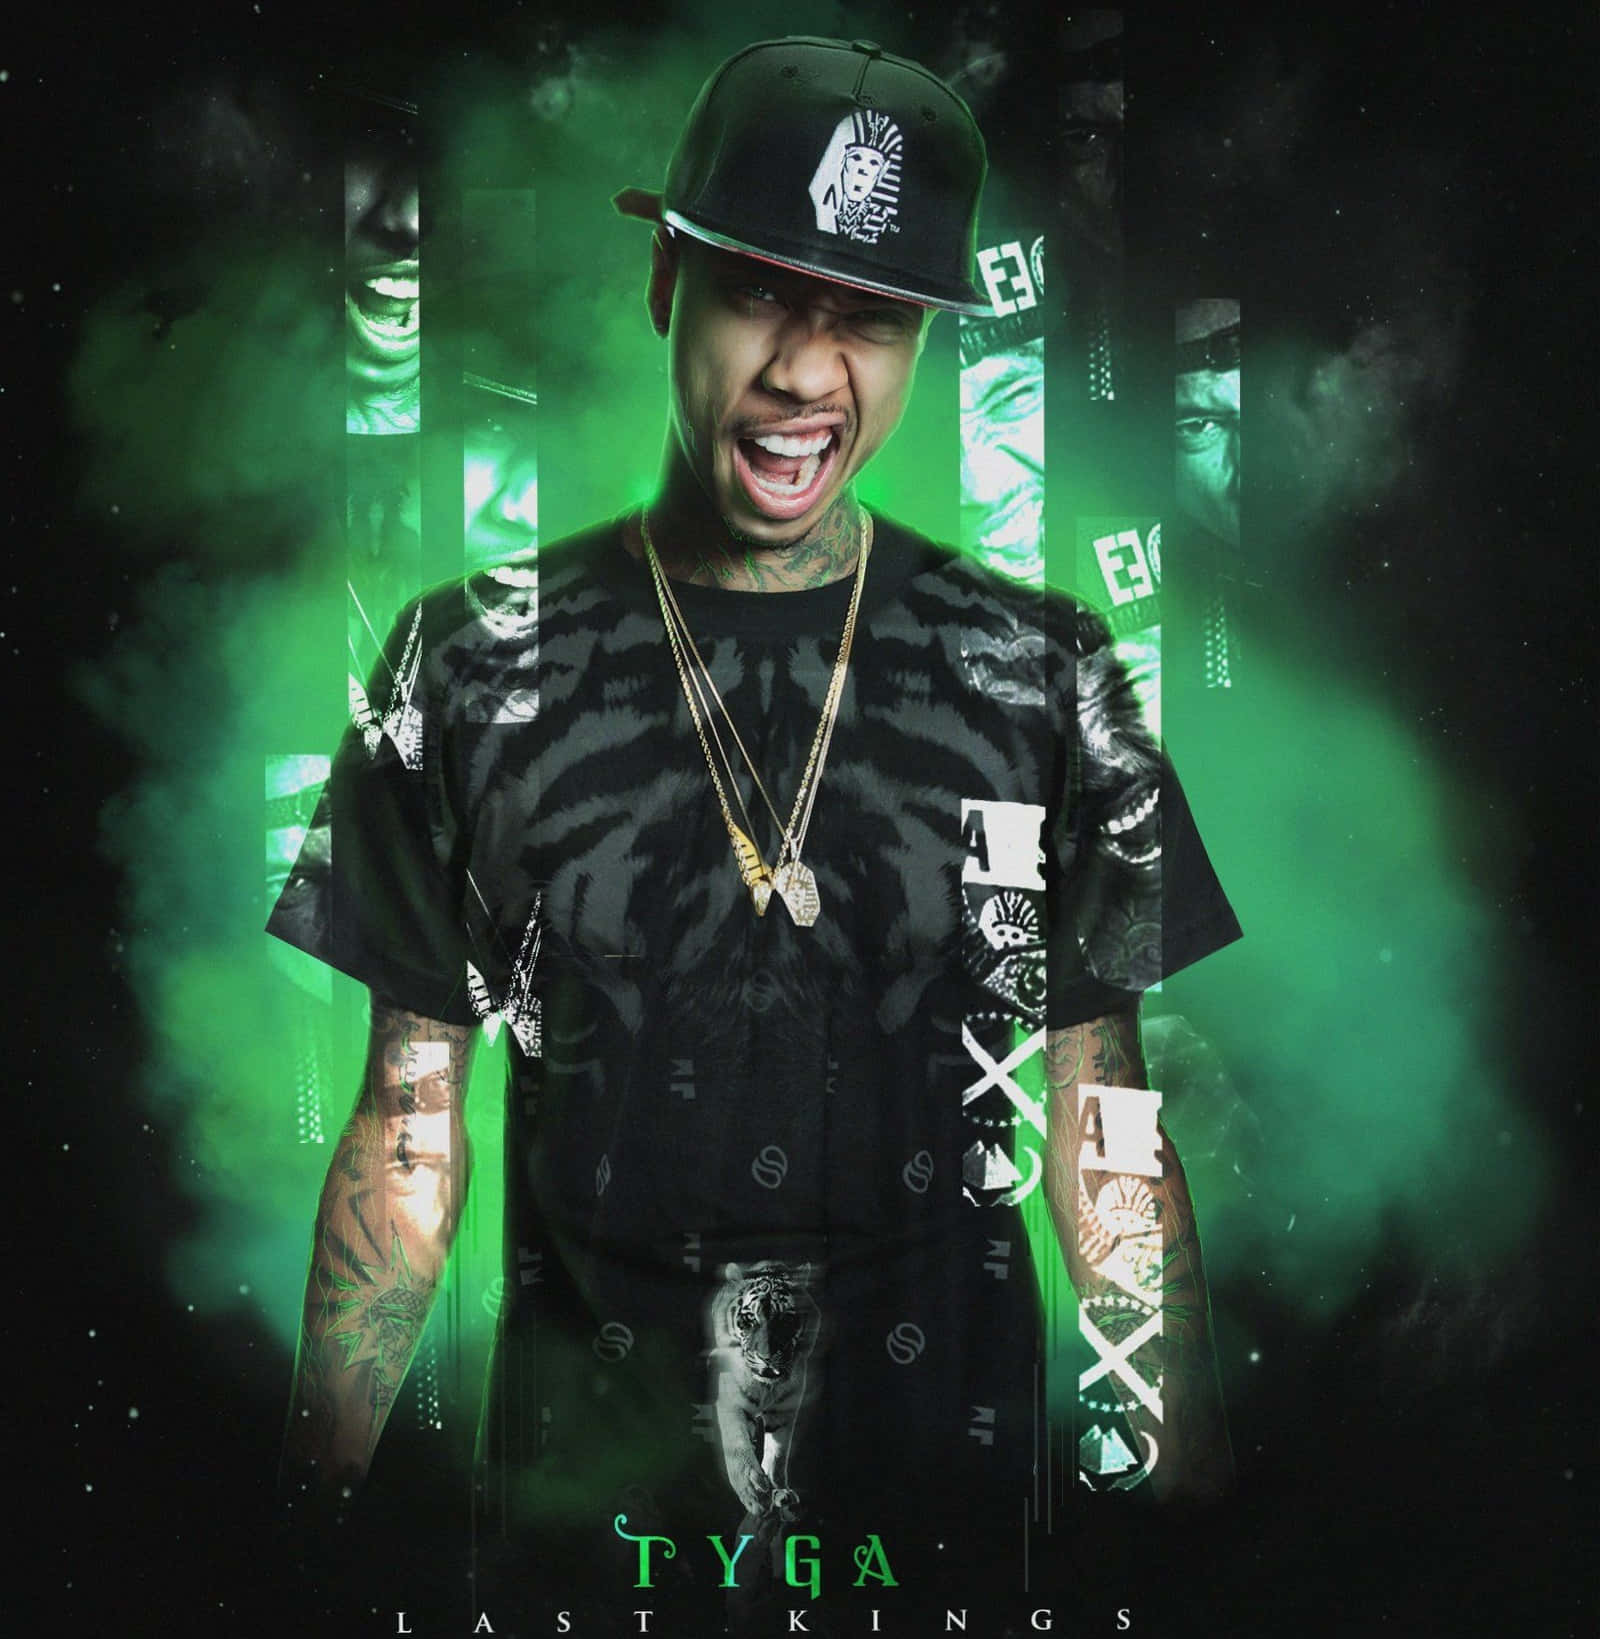 "Bringing the heat with the curves: Tyga flaunts his style." Wallpaper